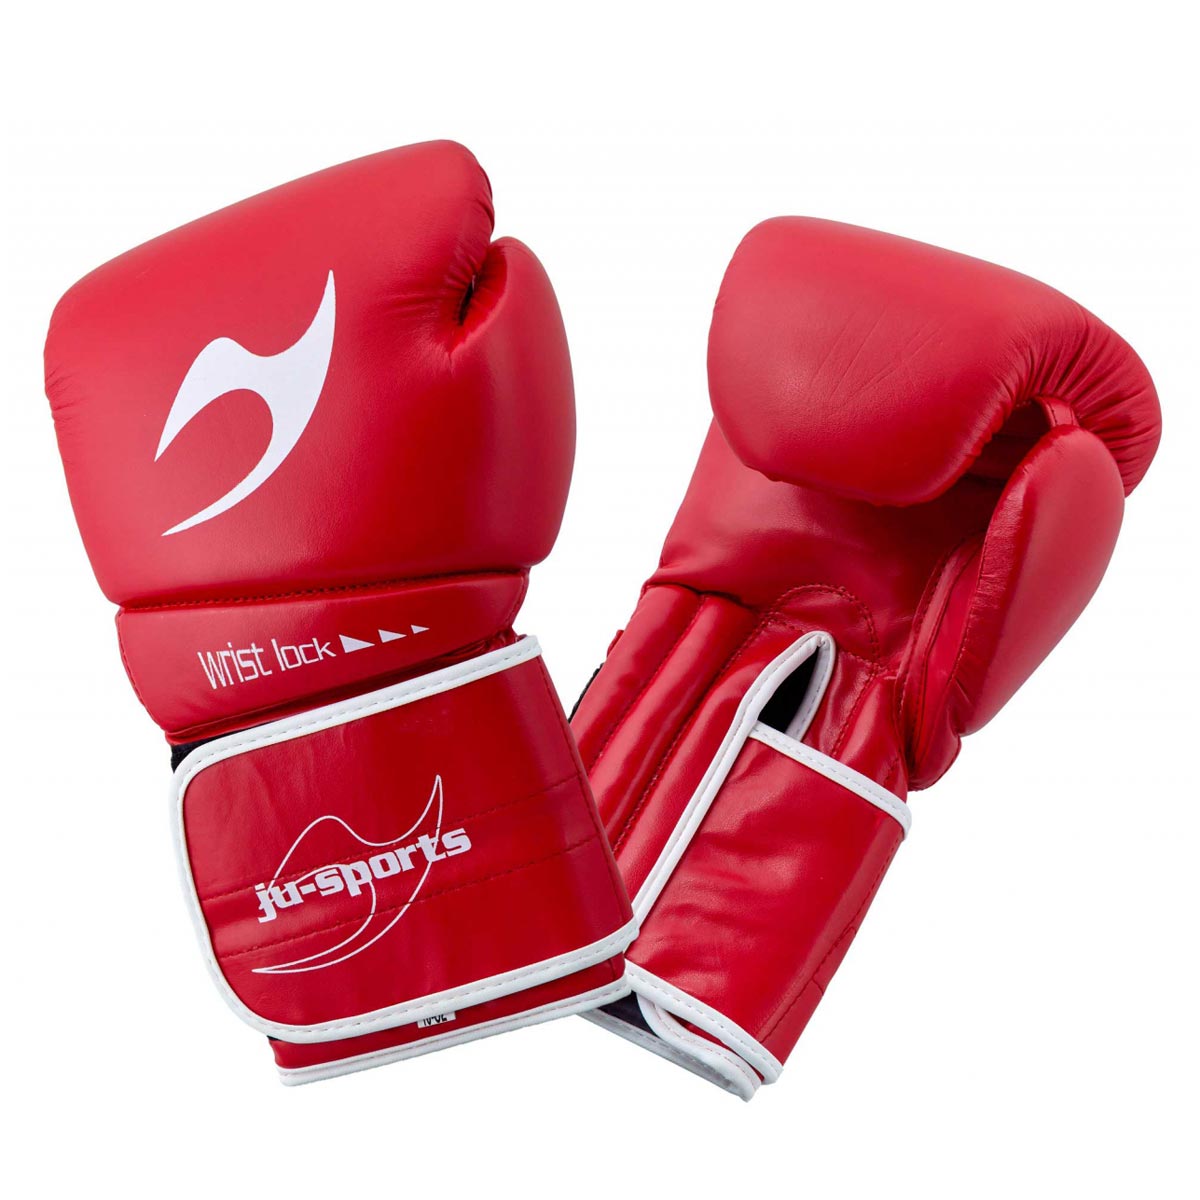 Oz Leather Boxing Re-AFR_000764_H2 ju- Sports Competitor 10 Pro Gloves C16